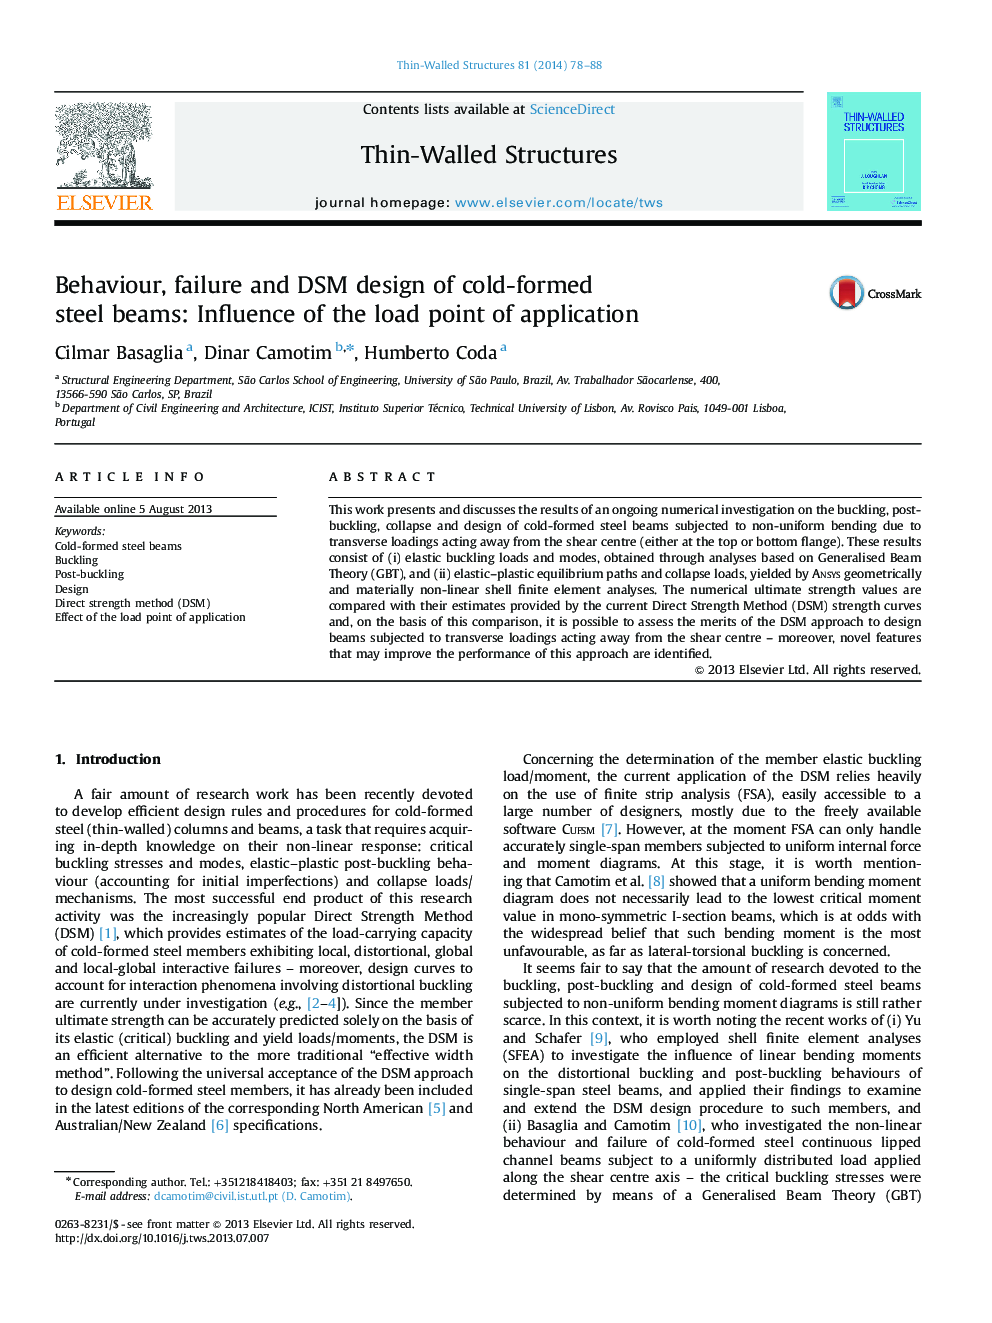 Behaviour, failure and DSM design of cold-formed steel beams: Influence of the load point of application